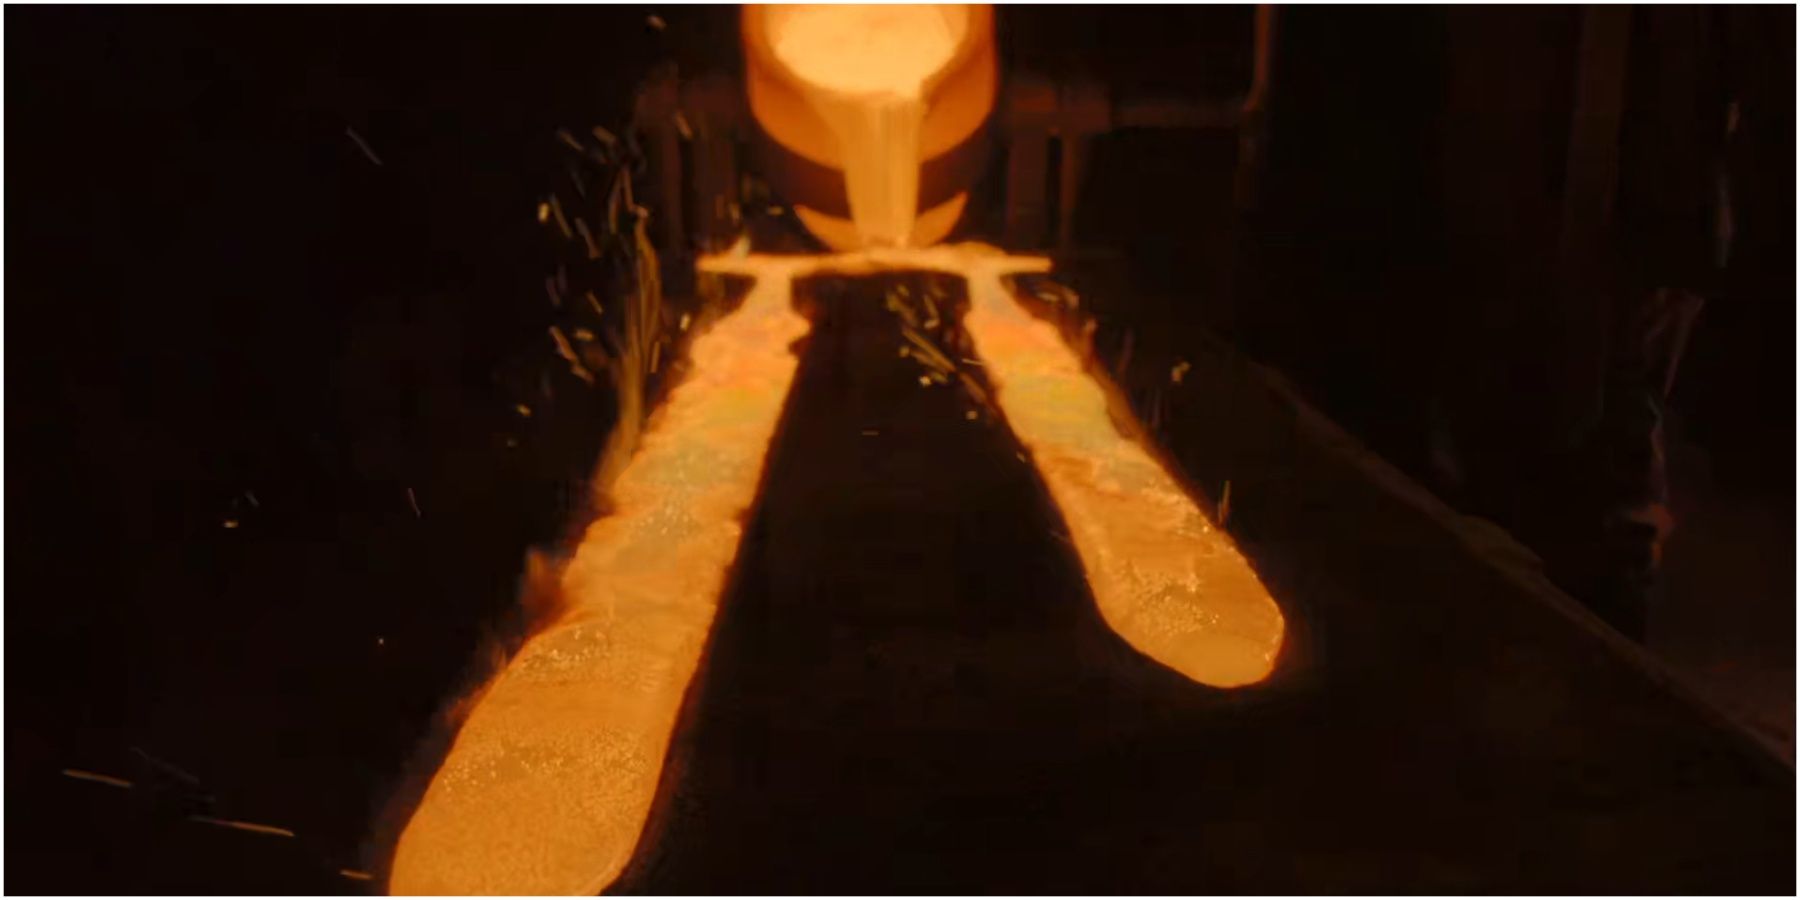 Ice melted down to create two blades in Game of Thrones.